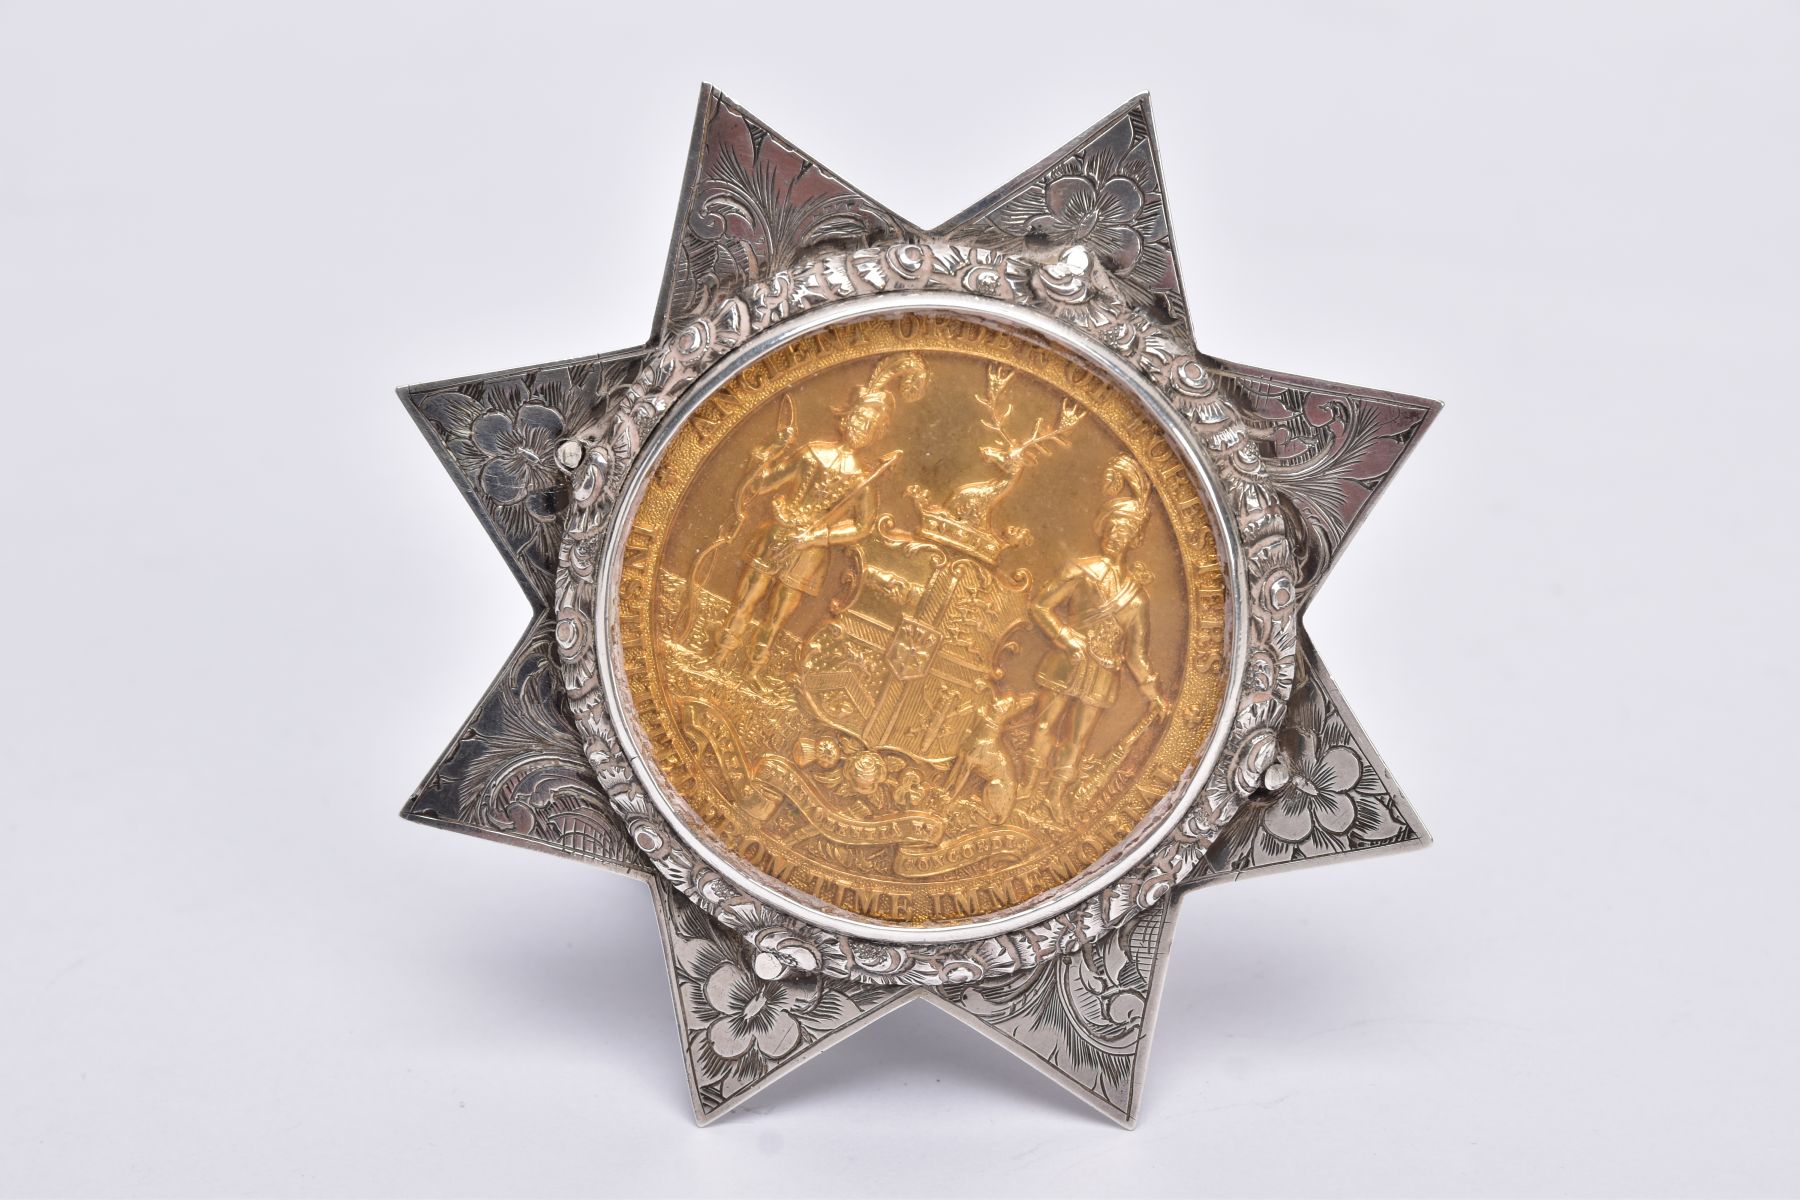 A MID VICTORIAN SILVER CHIEF RANGERS MASONIC MEDAL, star form with an engraved floral design, set